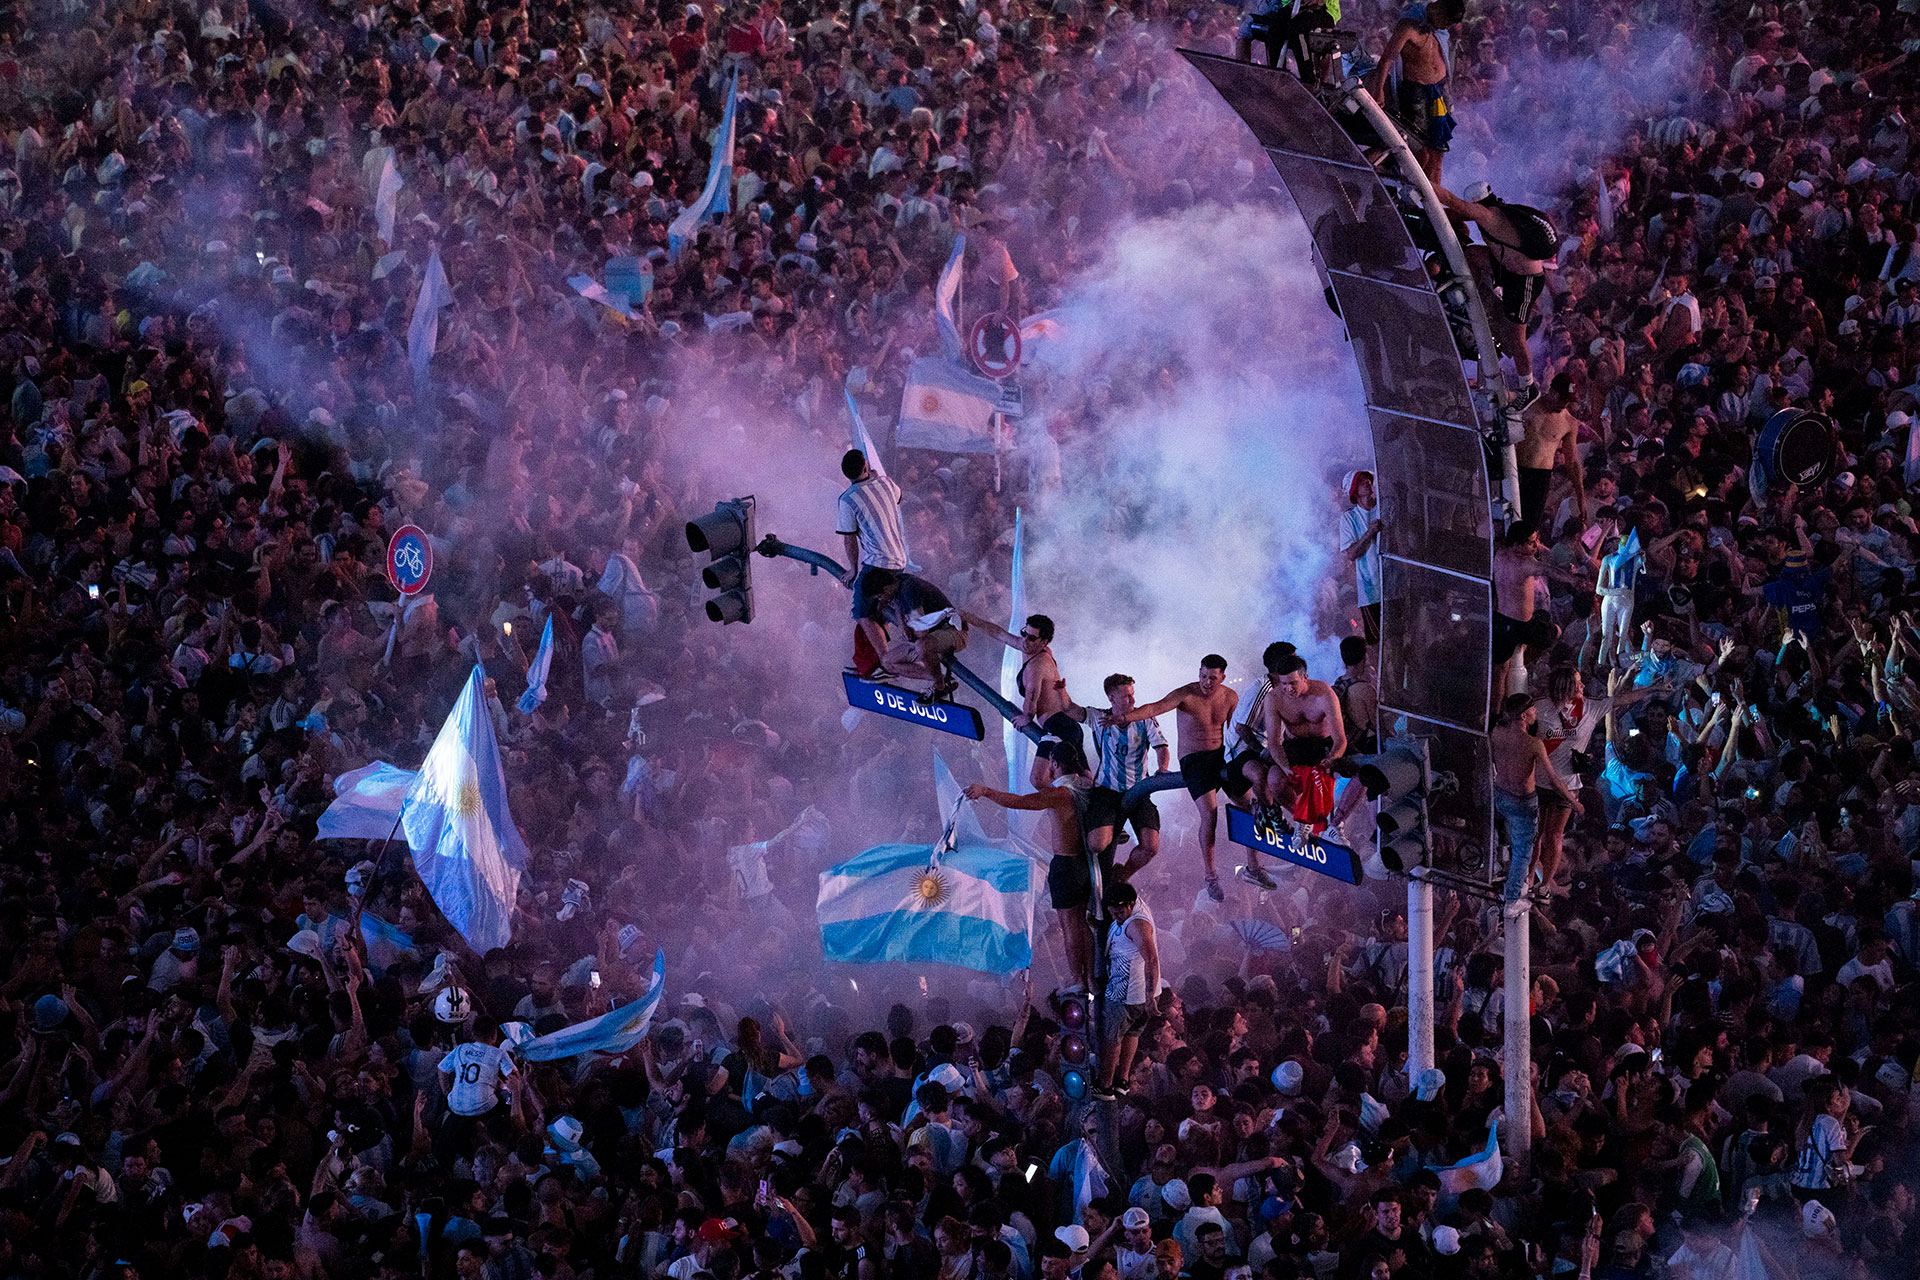 Argentine soccer fans celebrate their team's World Cup victory over France in downtown Buenos Aires, Argentina, Sunday, Dec. 18, 2022. (AP Photo/Rodrigo Abd)